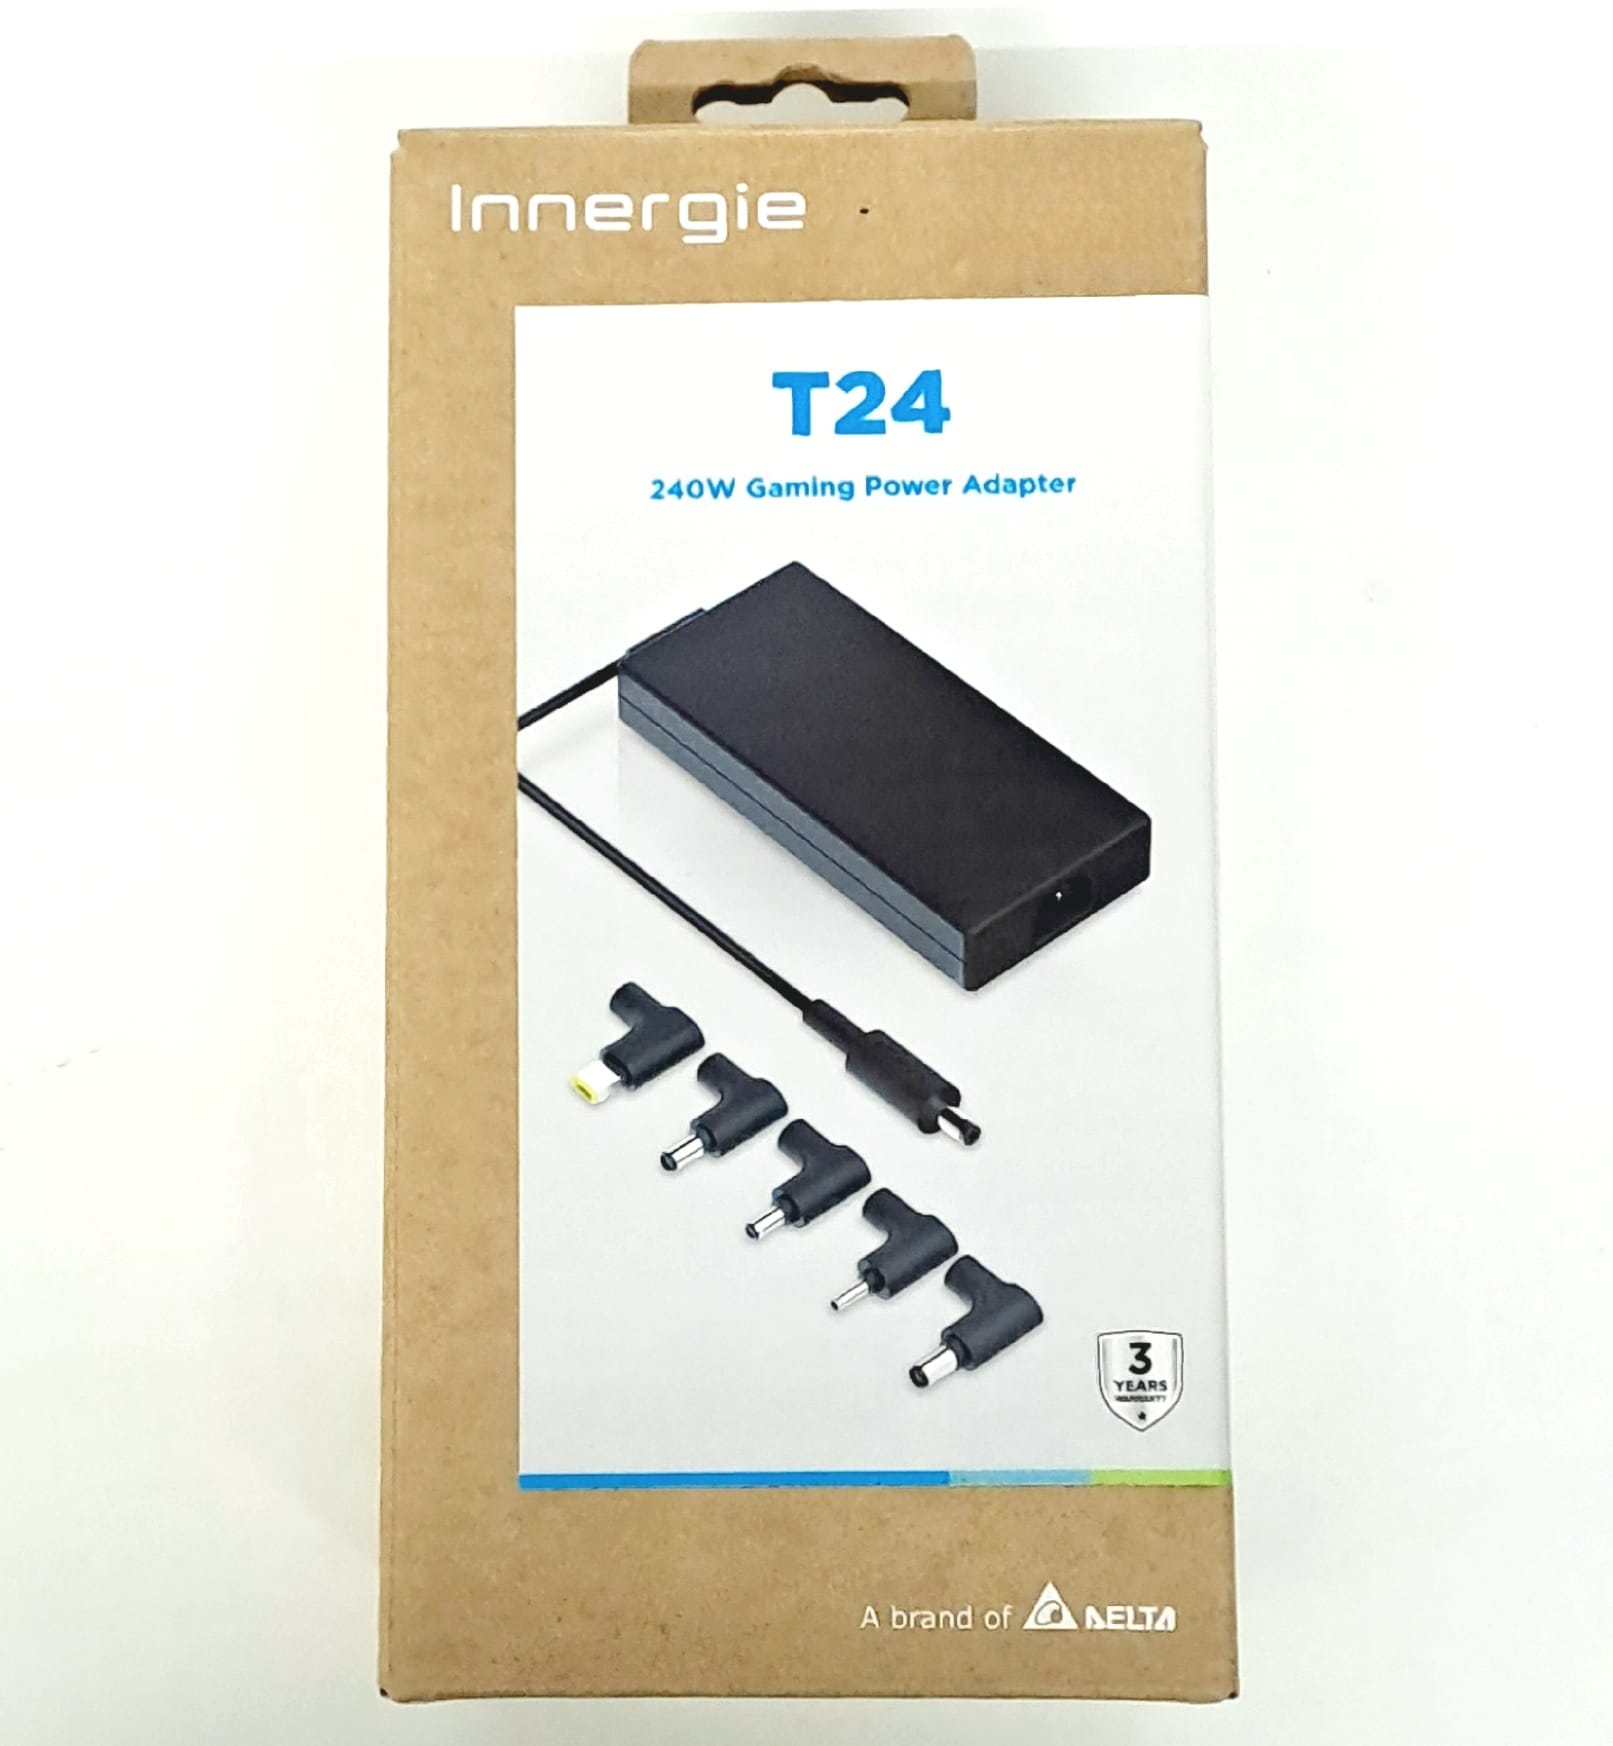 Innergie 240W Gaming Power Adapter 